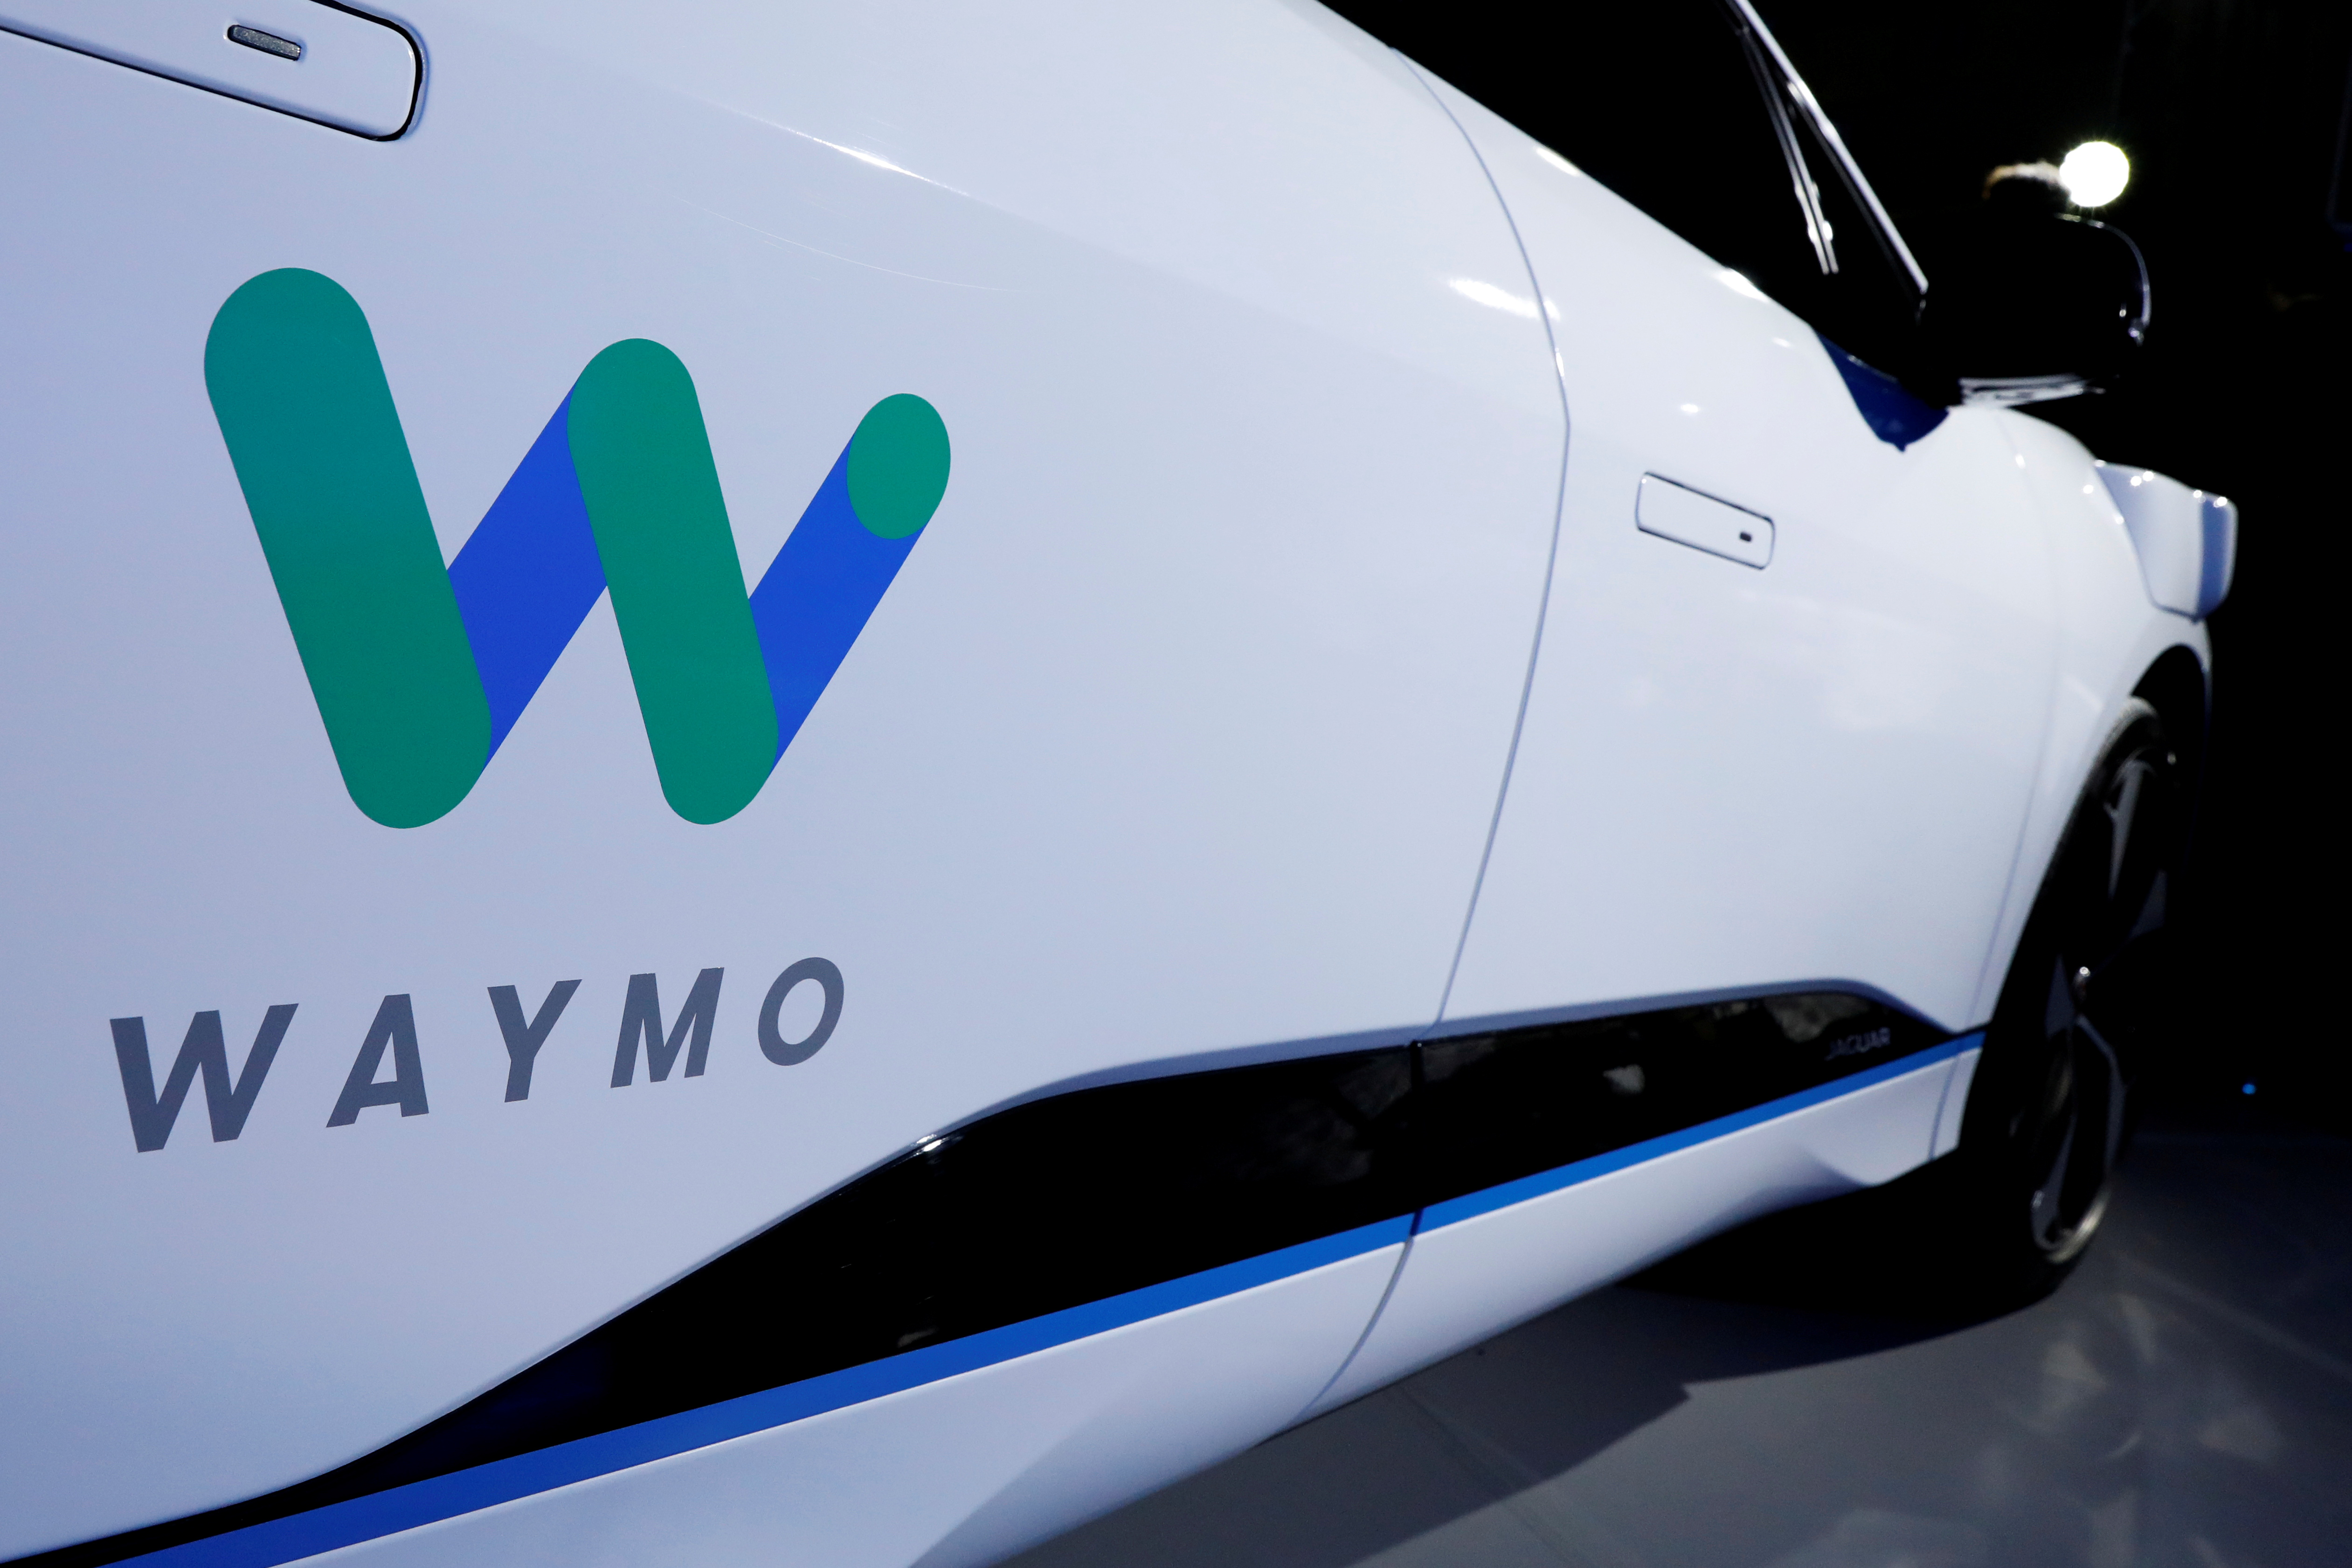 A Jaguar I-PACE self-driving car is pictured during its unveiling by Waymo in the Manhattan borough of New York